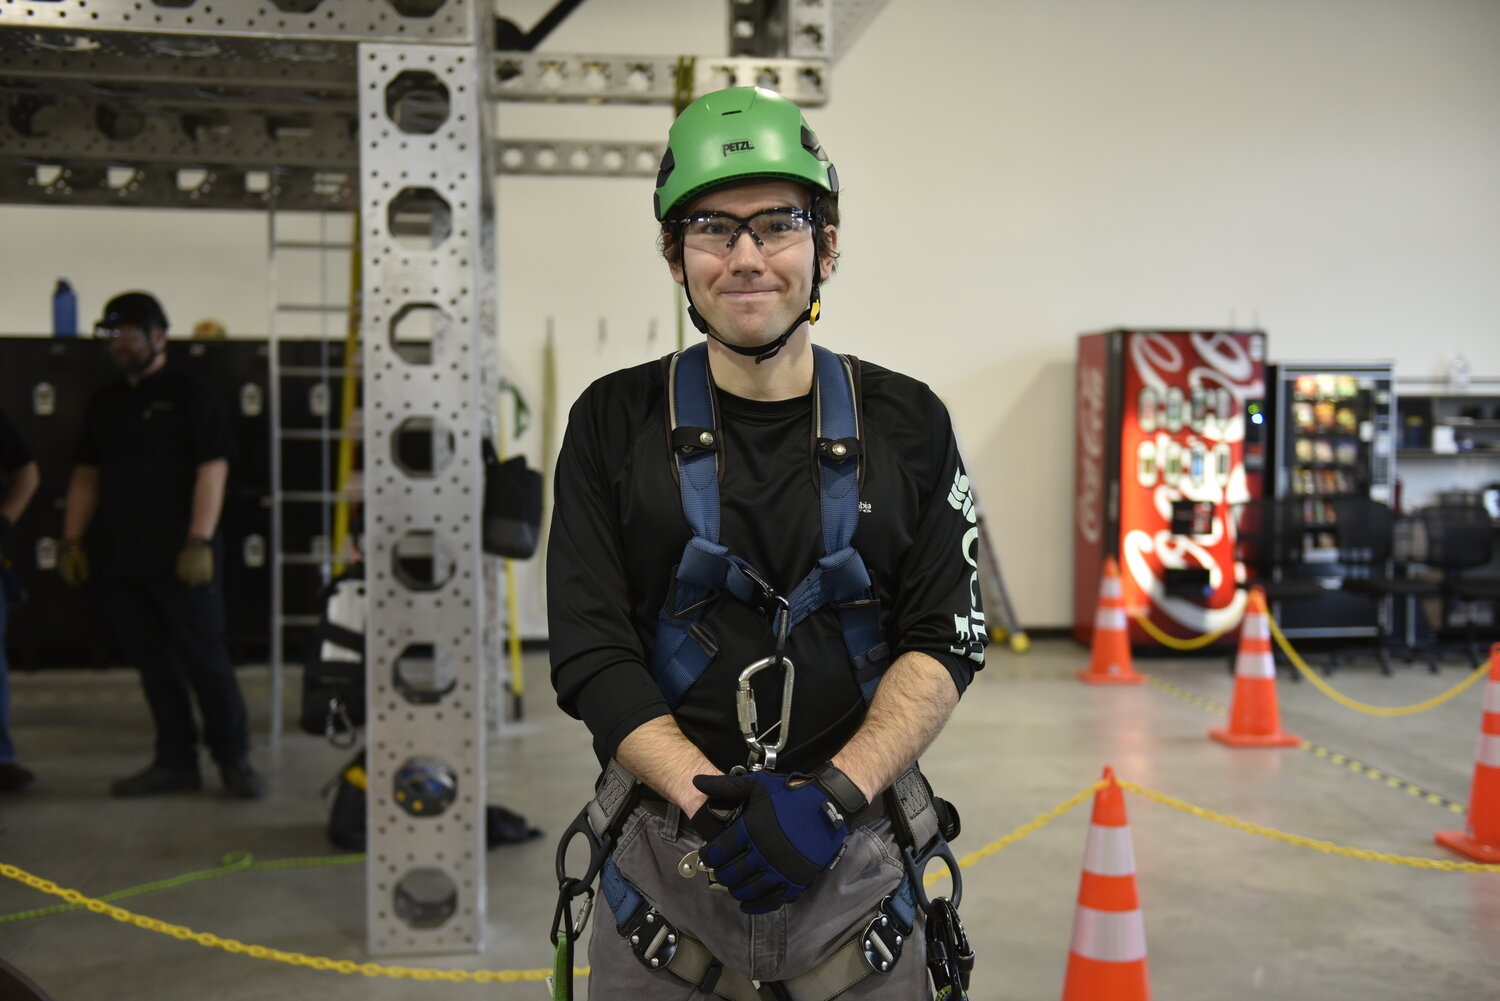 Student Zach Mills moved from Michigan to participate in the program and is excited to begin working as a wind turbine technician to support the use of clean energy.